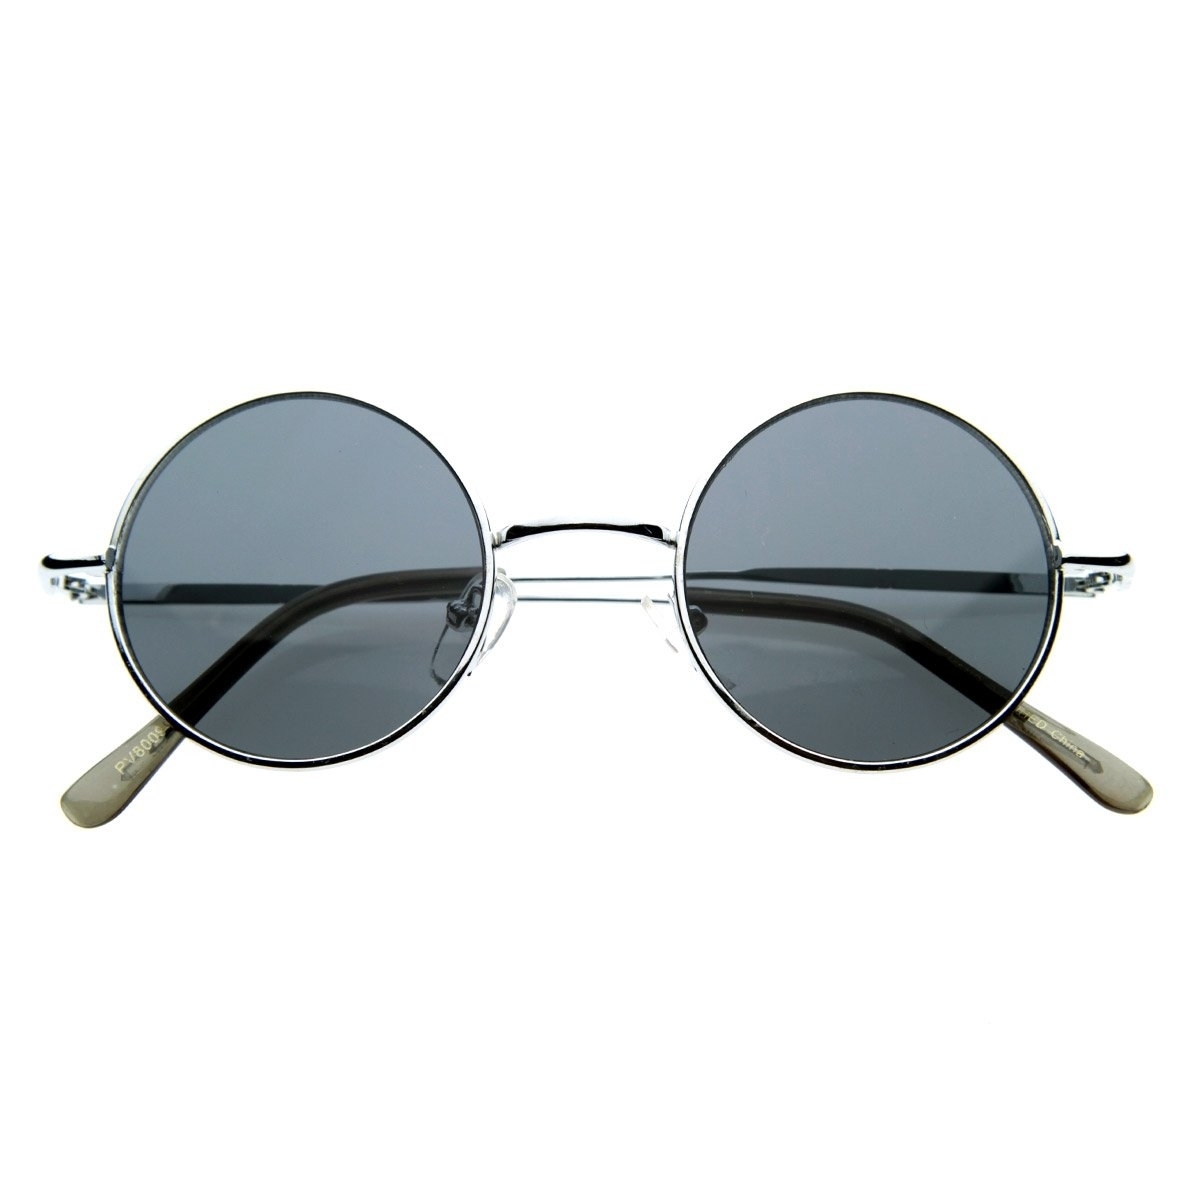 Small Retro-Vintage Style Lennon Inspired Round Metal Circle Sunglasses - Silver